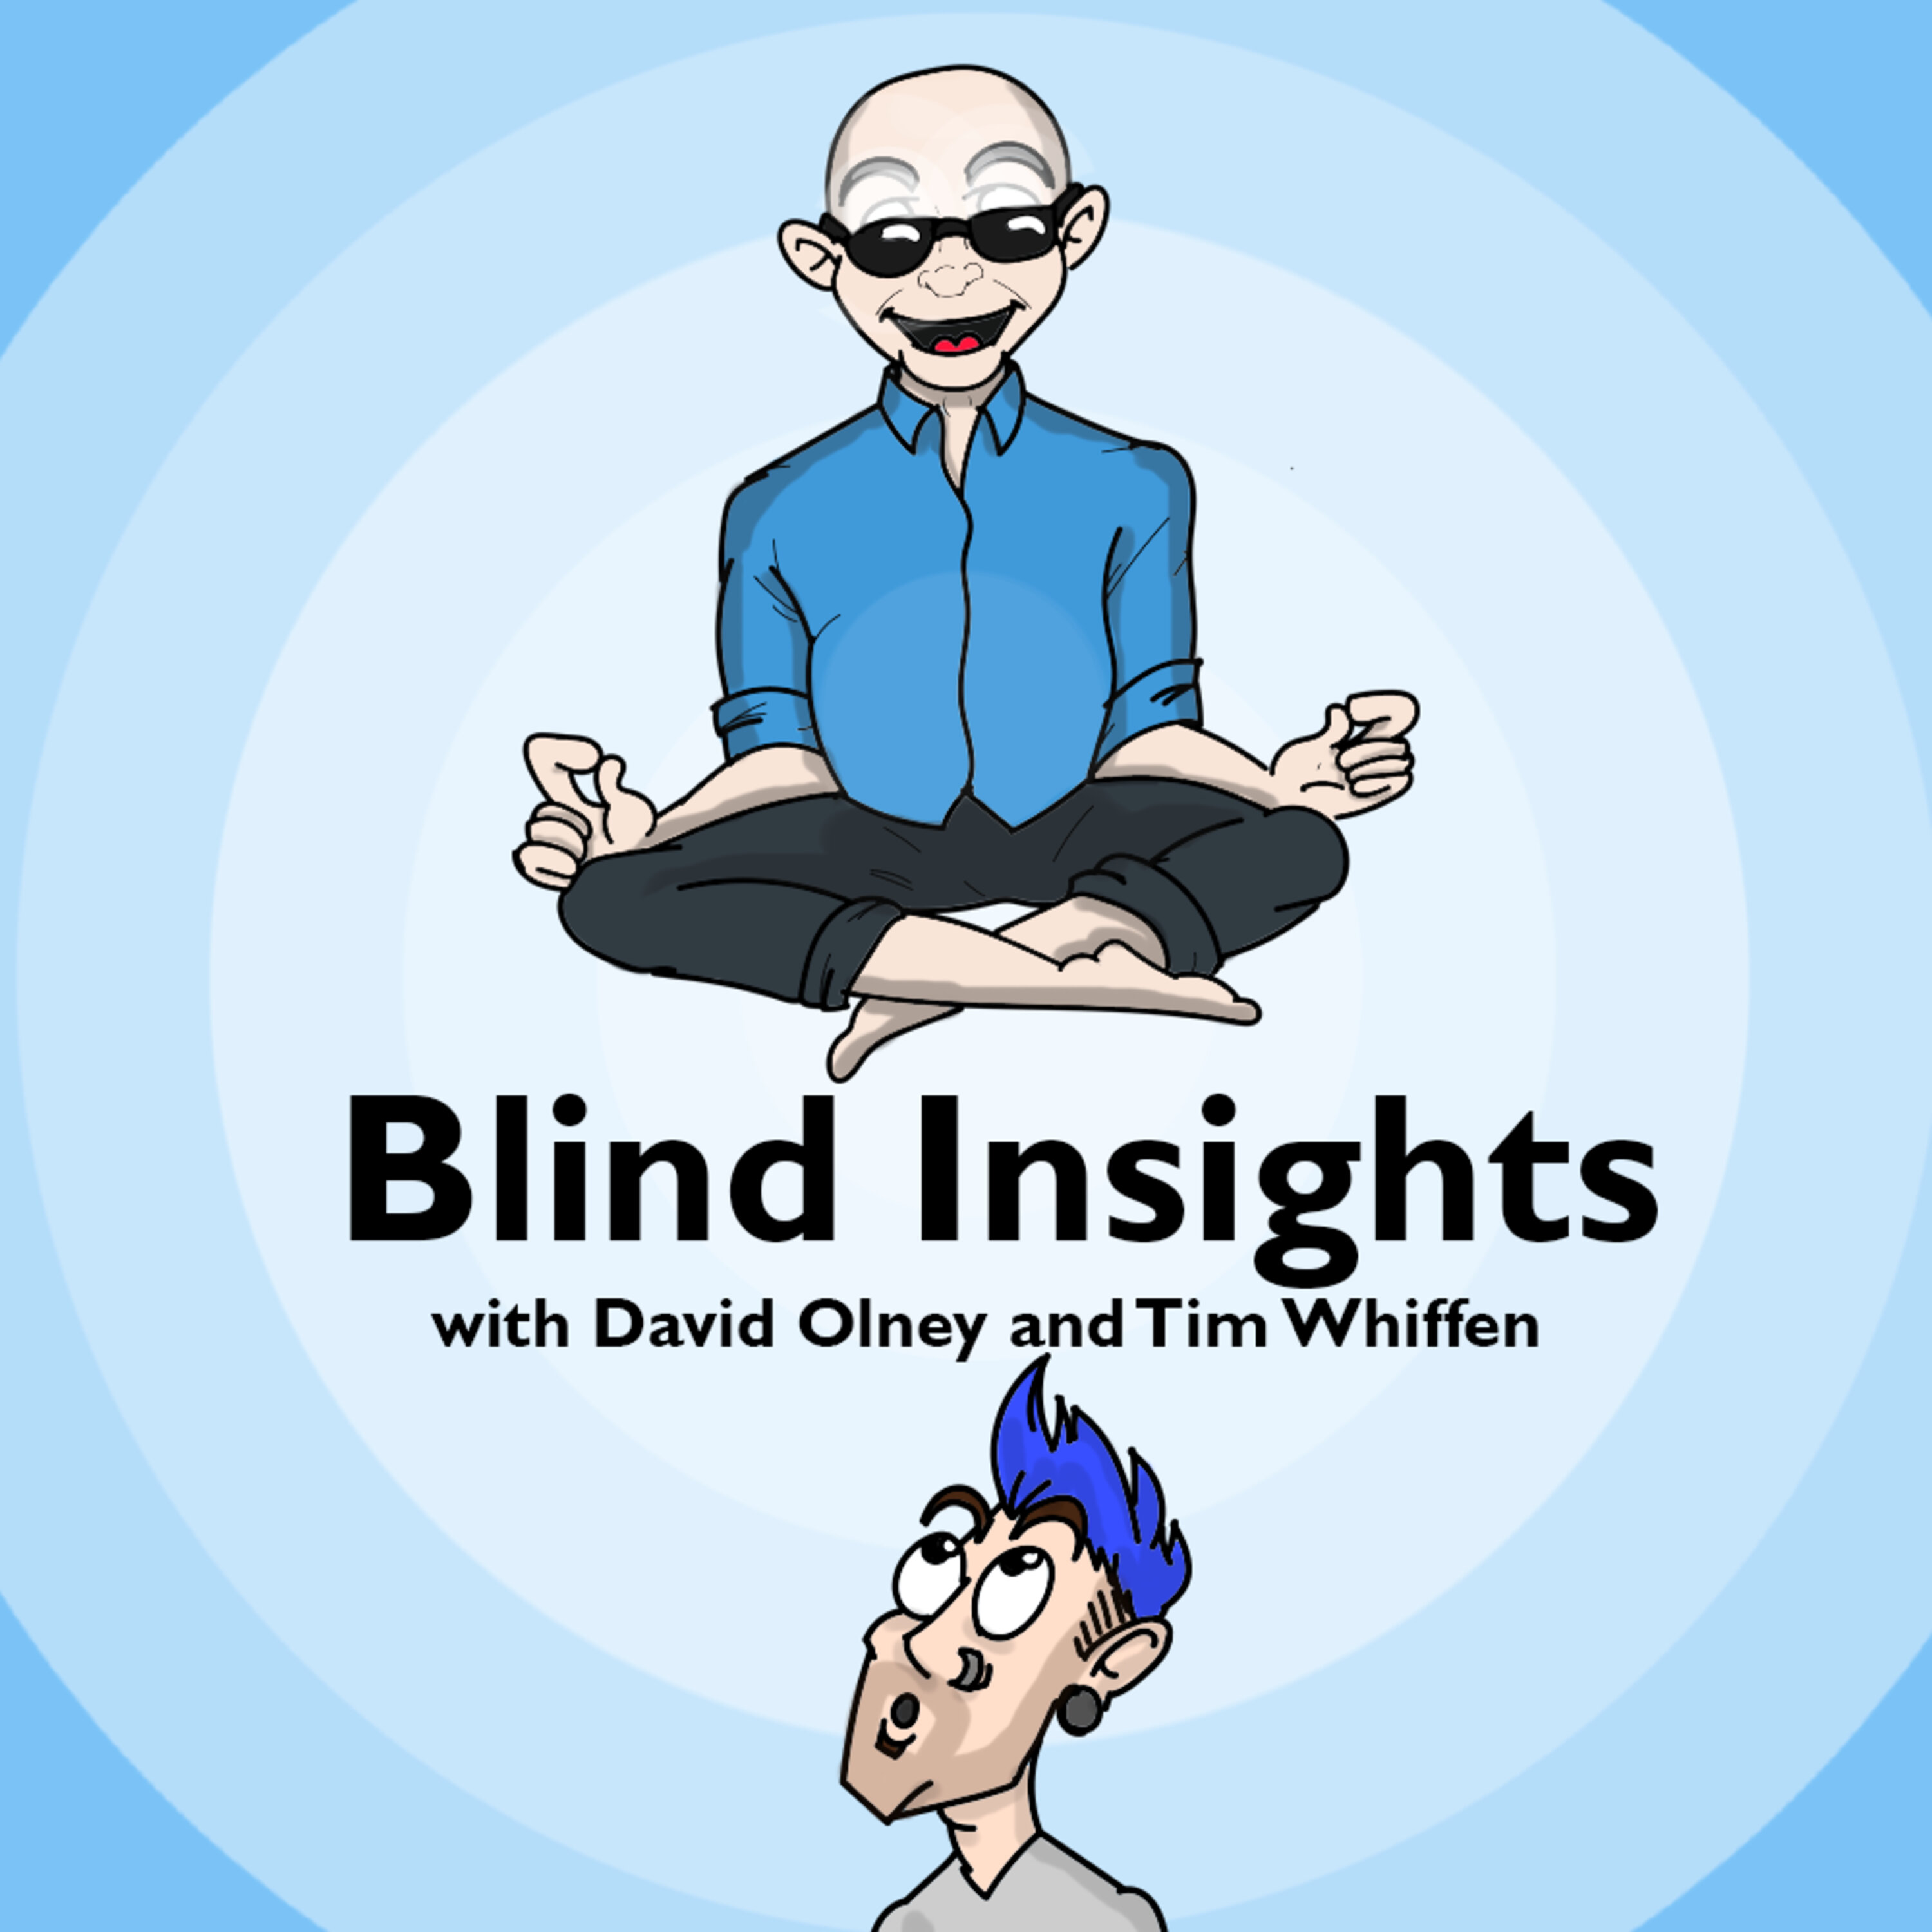 Blind Insights - Why bother voting this election? (Special Guest Dr. John Bruni)